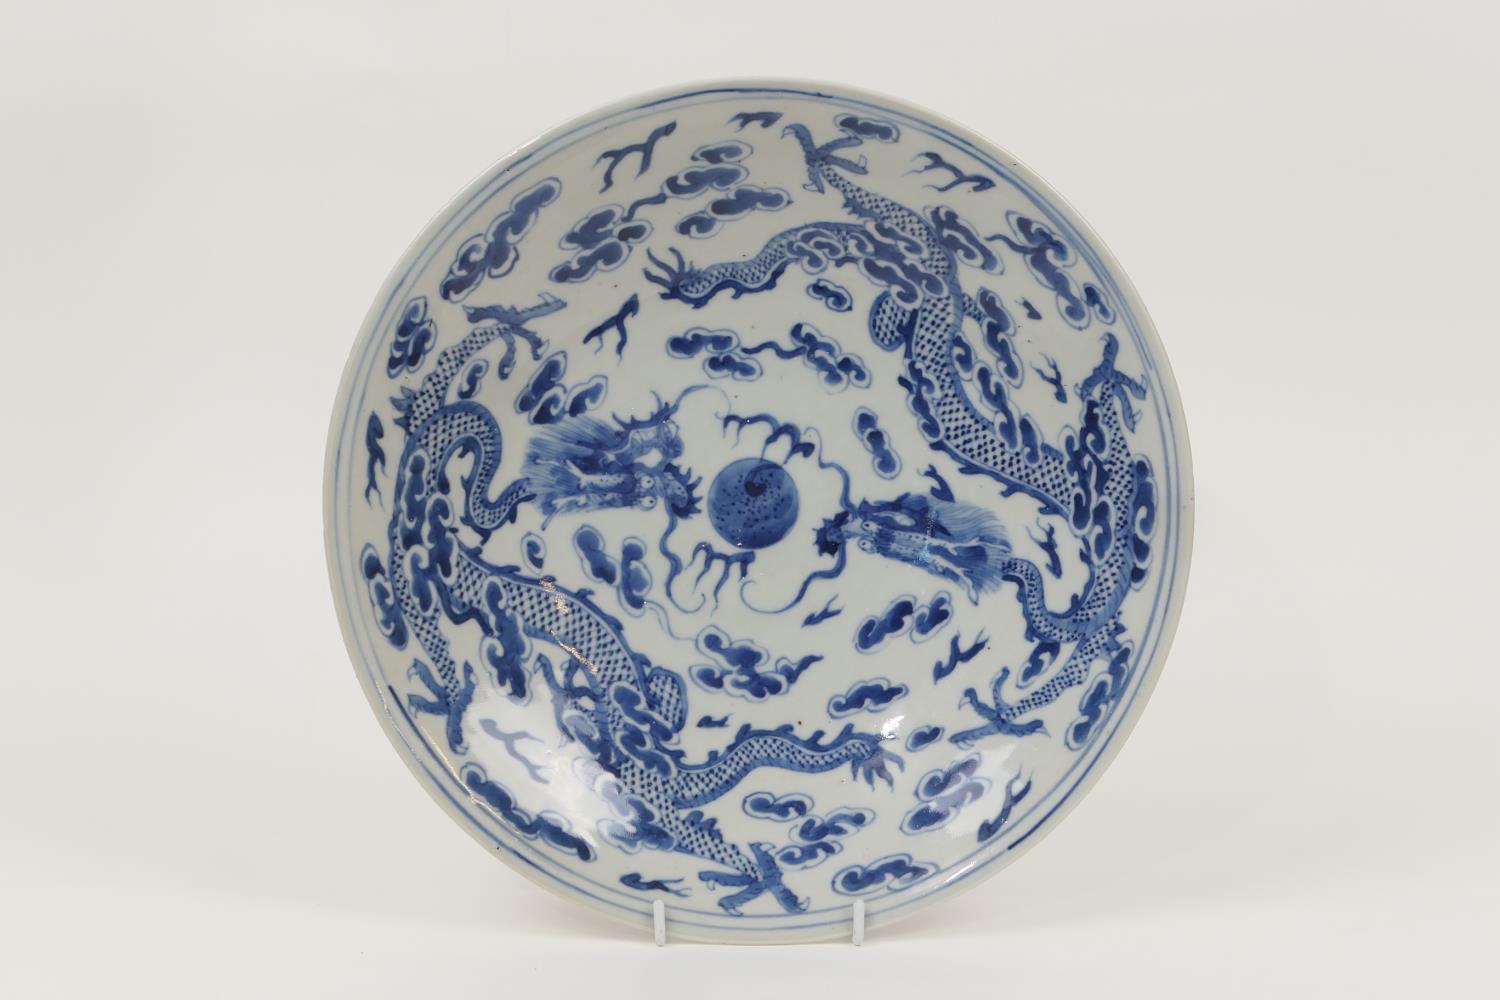 Chinese blue and white plate, early 20th Century, decorated with dragons chasing a central flaming